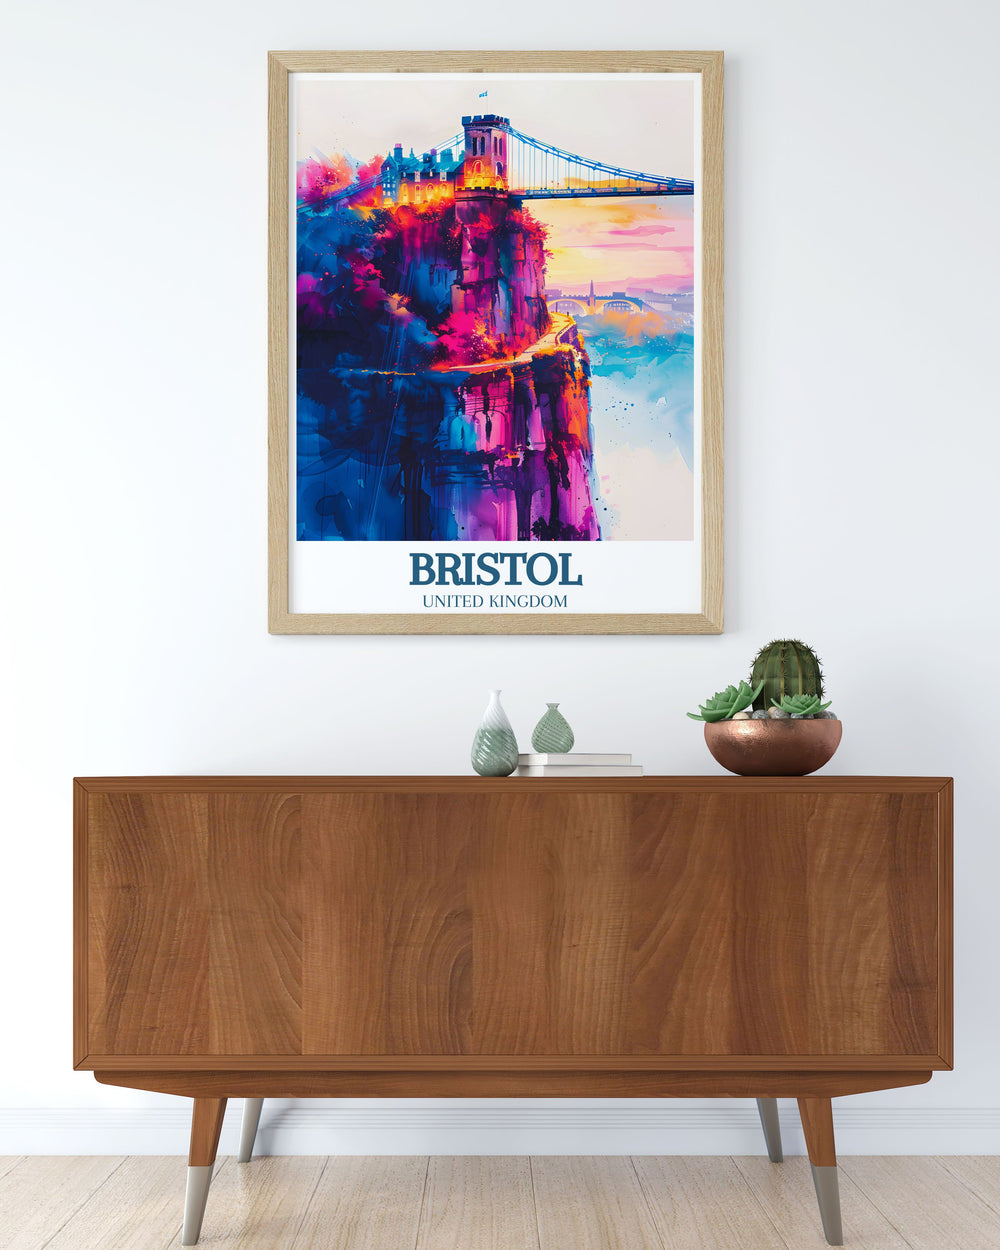 Stunning Ashton Court Print showcasing the excitement of mountain biking on the Nova Trail MTB. Includes the Clifton suspension bridge River Avon, making it a great addition to cycling wall art collections and a striking piece of Bristol home decor.